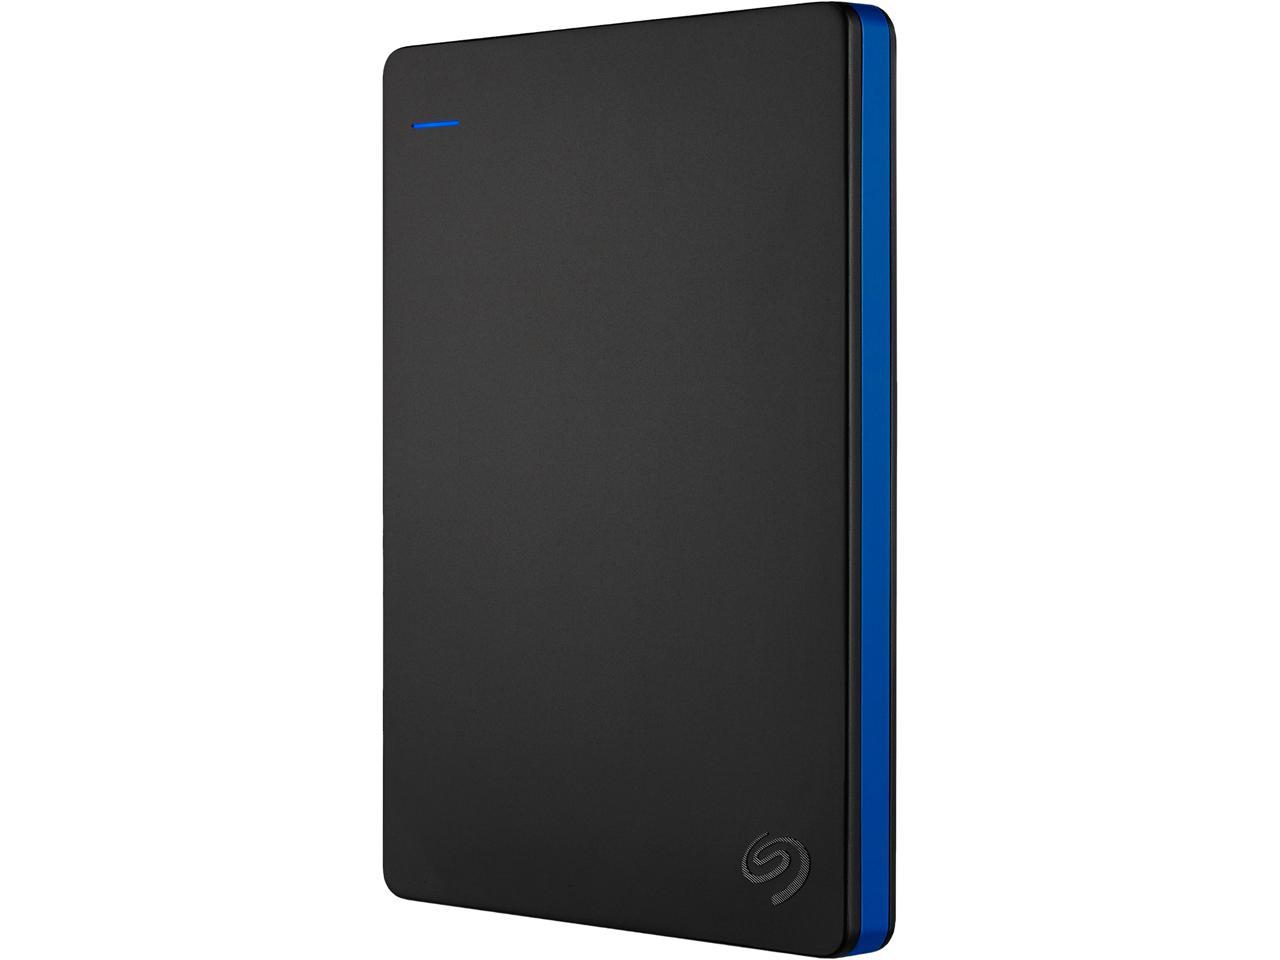 seagate game drive 2tb portable external hard drive for playstation 4